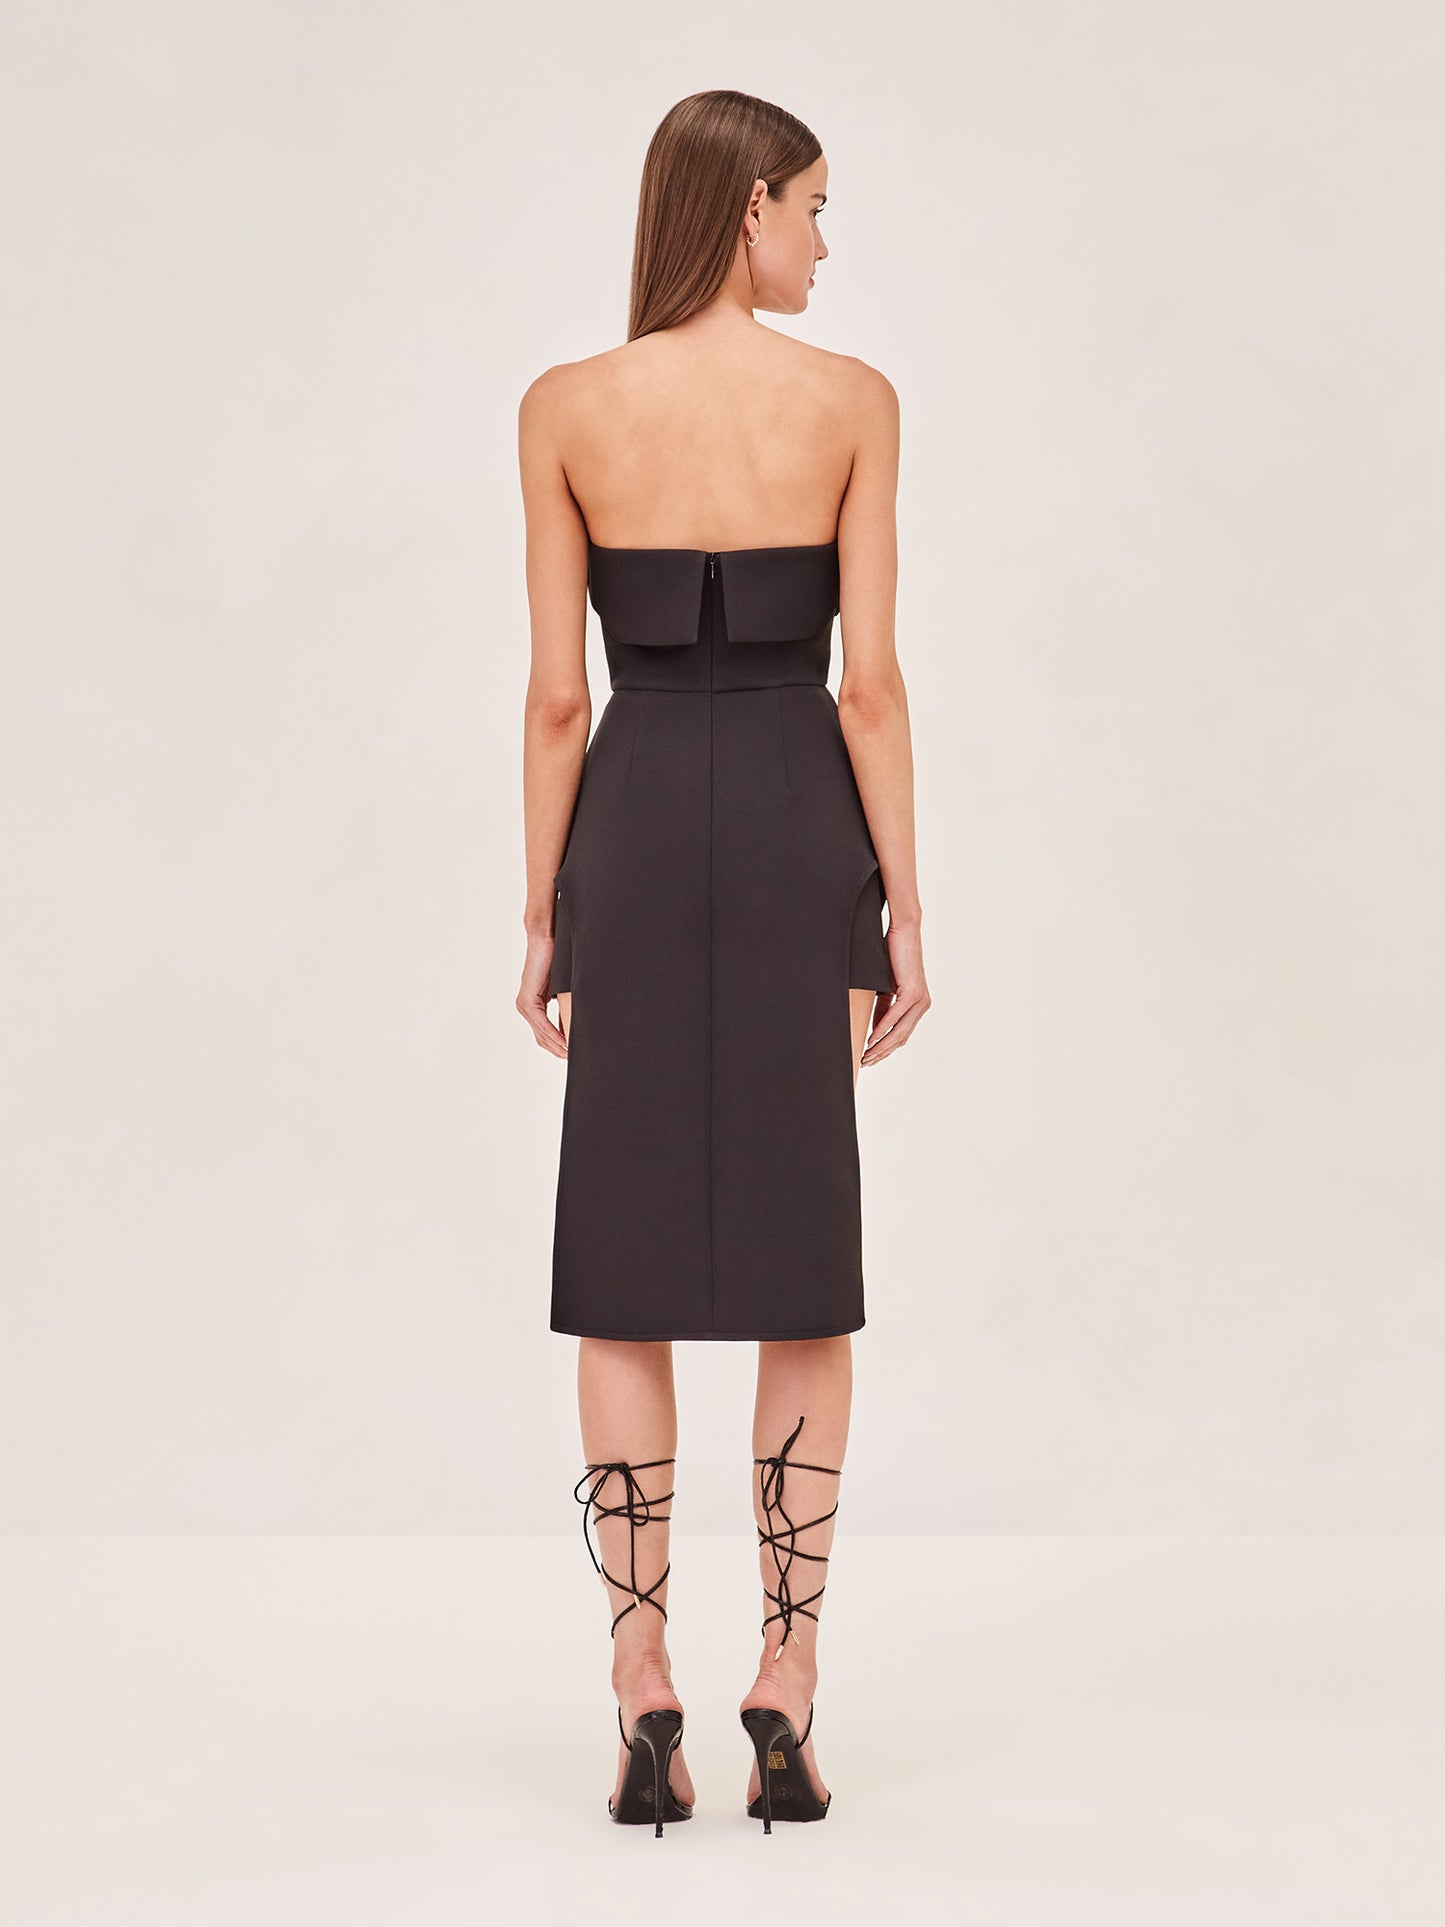 ALEXIS Akera strapless top in black back image.